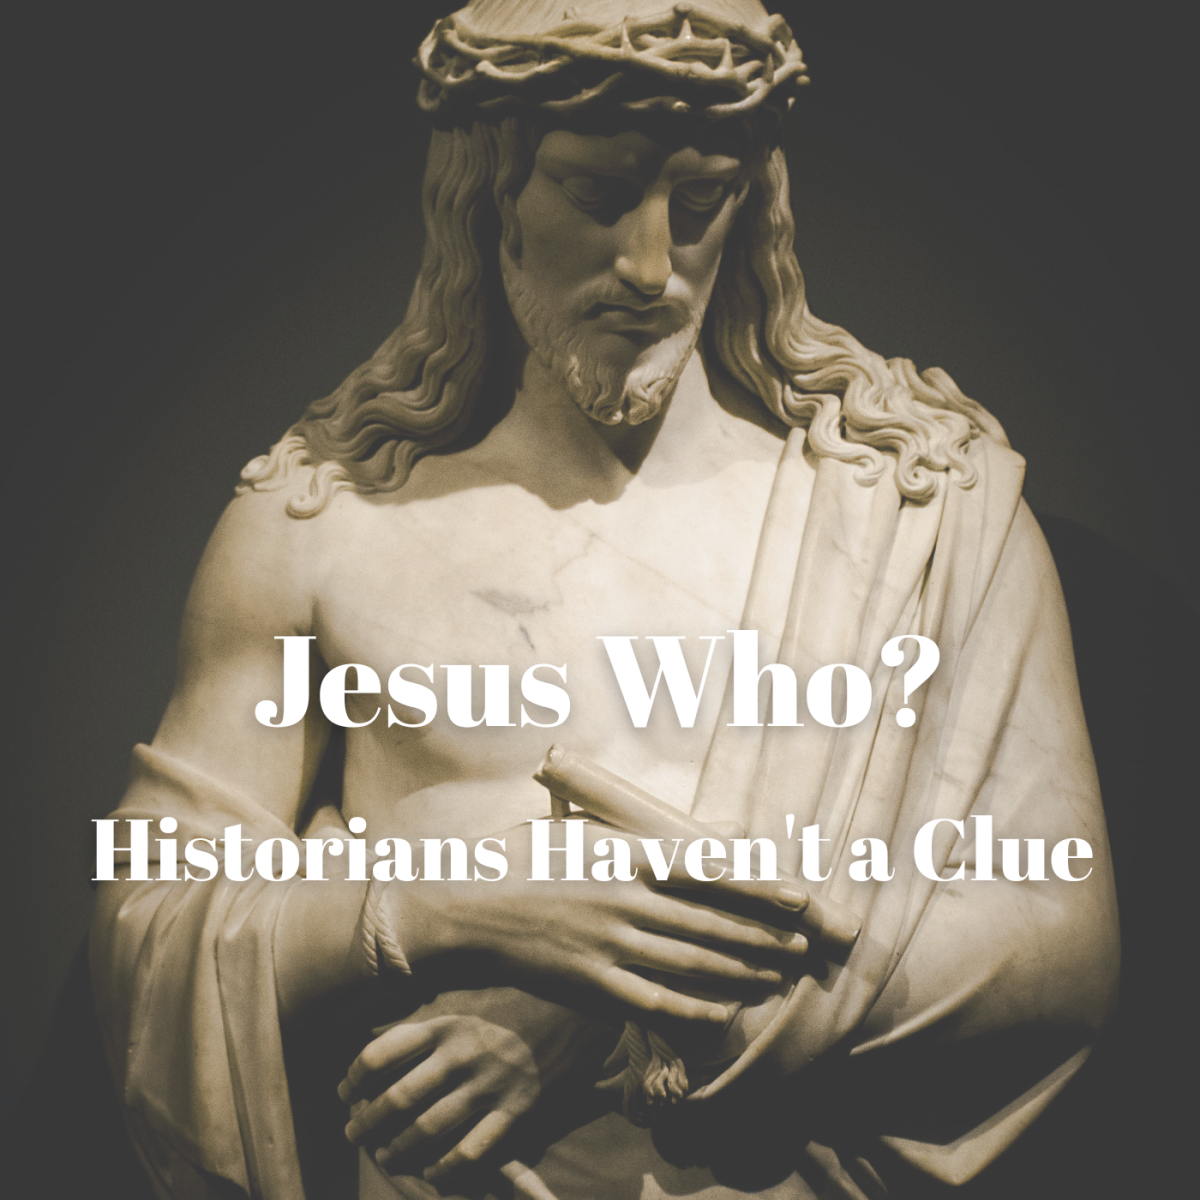 Historians of the 1st and 2nd century apparently never heard of Jesus Christ. 